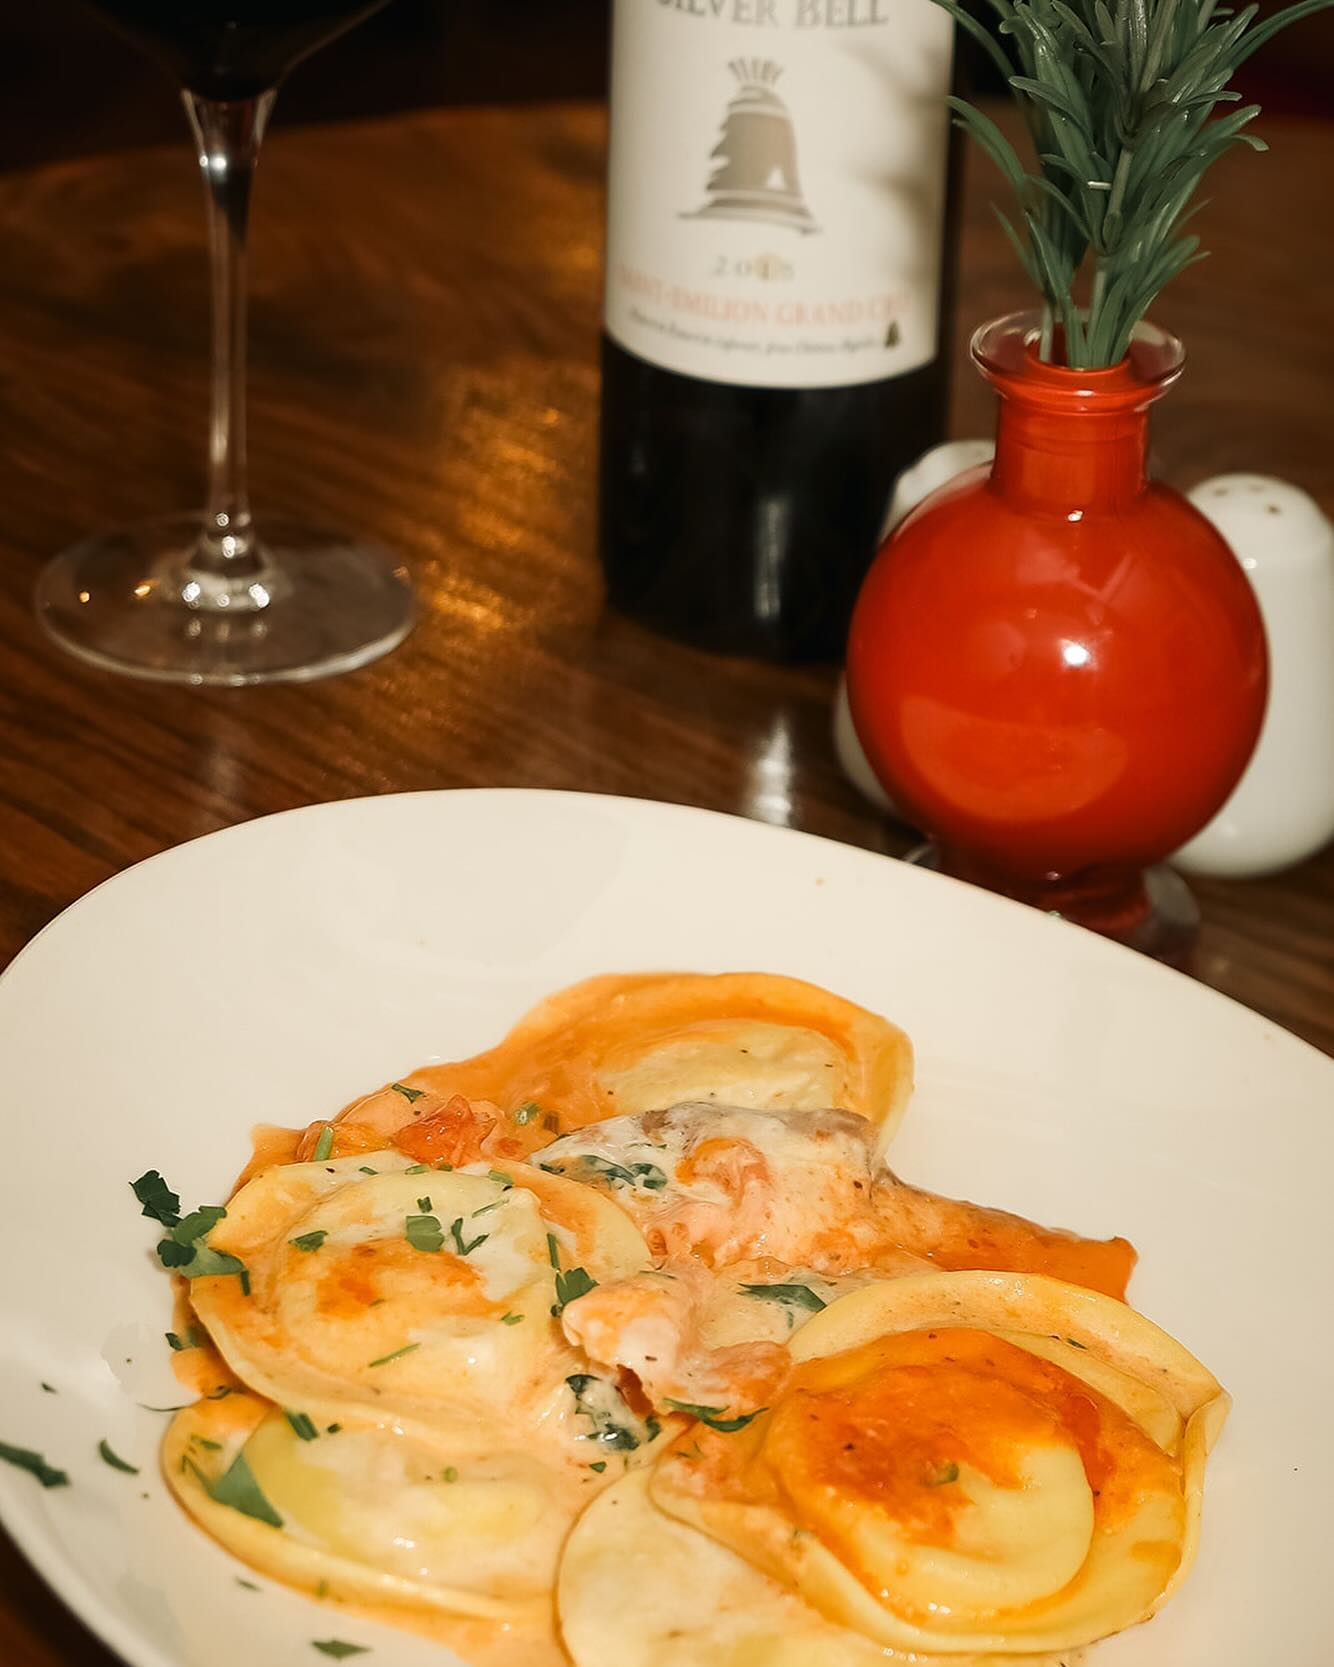 It’s Friday, join us for fine wine and Mediterranean plates 🍽️🍷

#foodies #jq #jewelleryquarter #foodblogger #bhamfoodie #bhameats #finewine